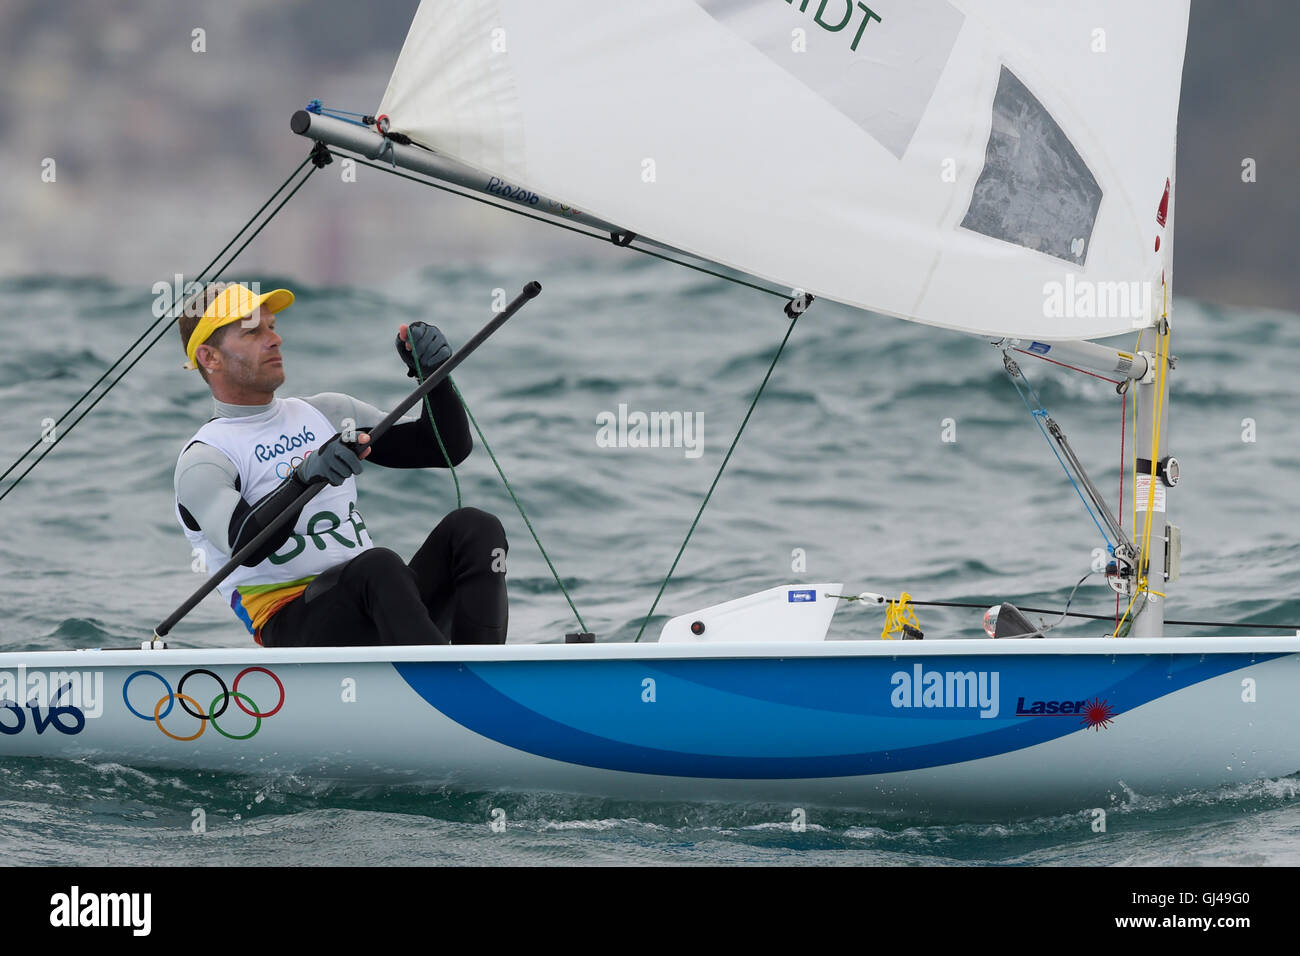 Rio de Janeiro, Brazil. 12th August, 2016. Robert SCHEIDT (BRA) in the men&#39aser catecategory during the candle Rio Olympics 2016 held at Ma da Glória, in Guanabara Bay. NOT AVAILABLE BLE FOR LICENSING IN CHINA (Photo: Celso Pupo/Fotoarena) Stock Photo